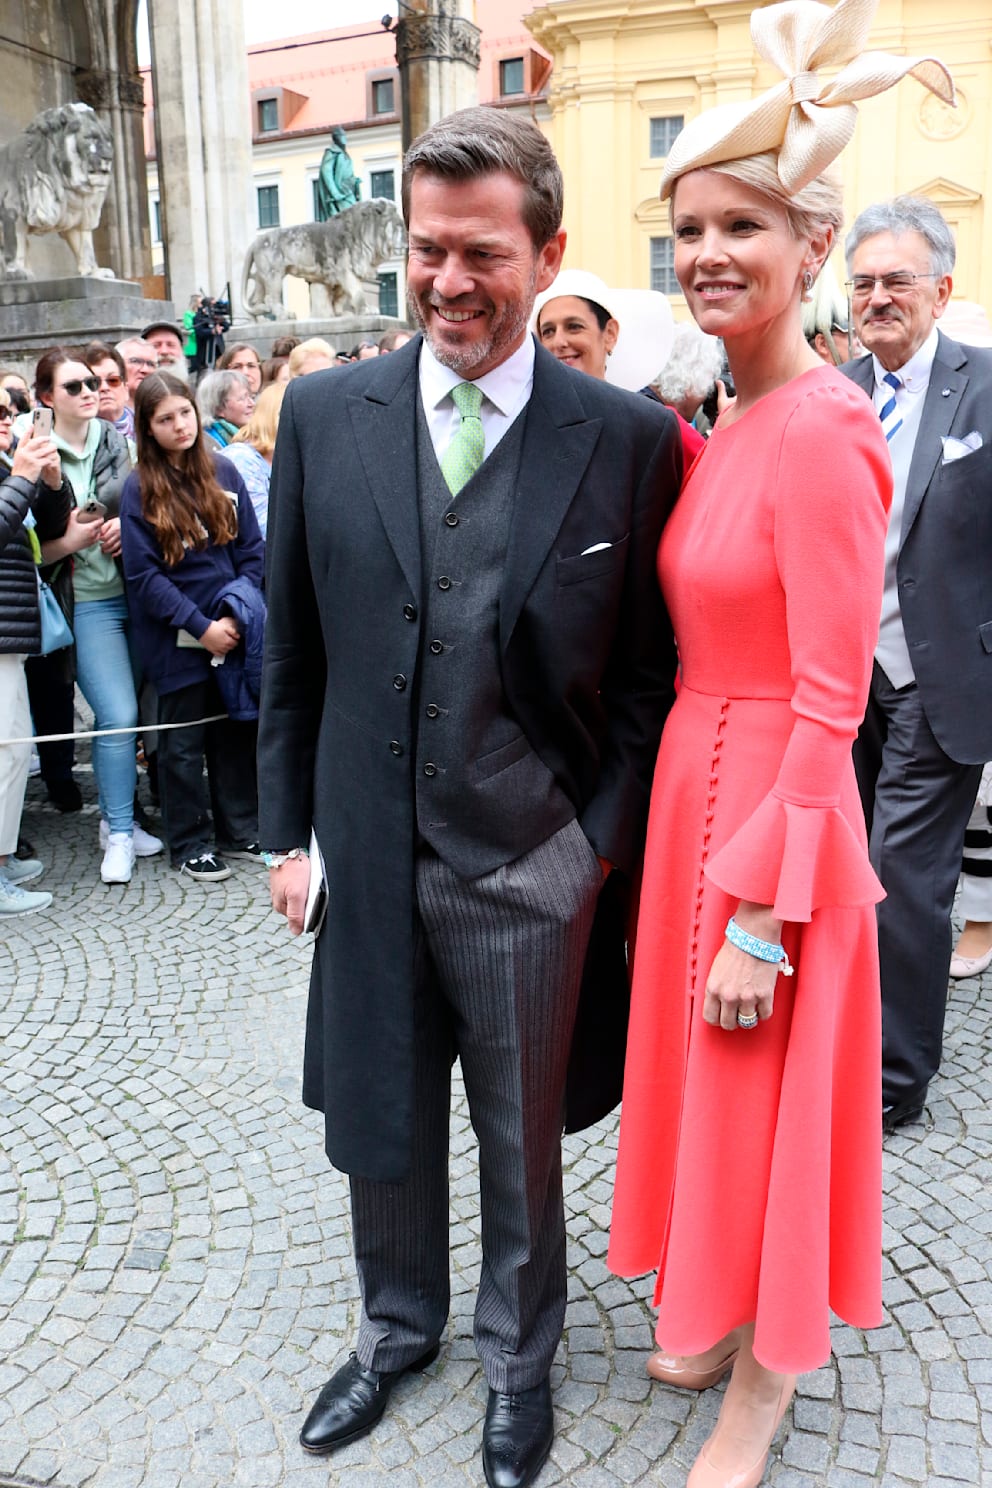 In May, Karl-Theodor zu Guttenberg and Stephanie were beaming at the wedding of Ludwig, Prince of Bavaria, celebrating their love